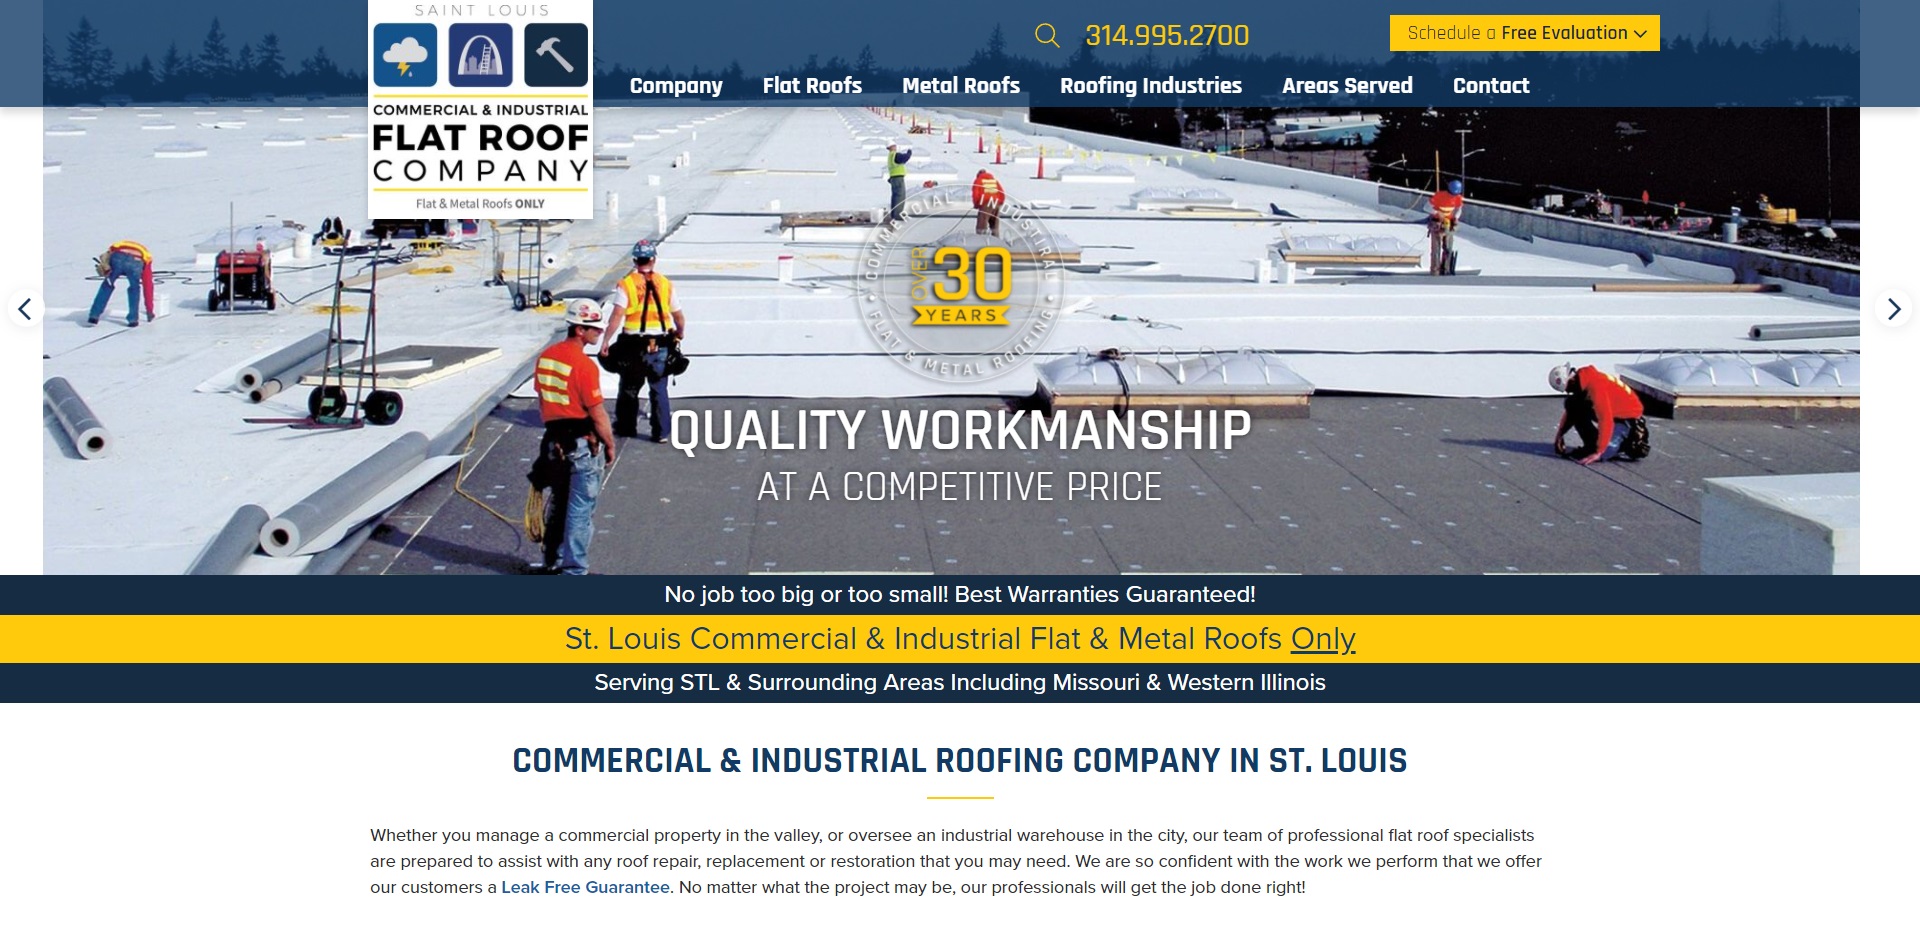 The Best Roofing Contractors in St. Louis, MO